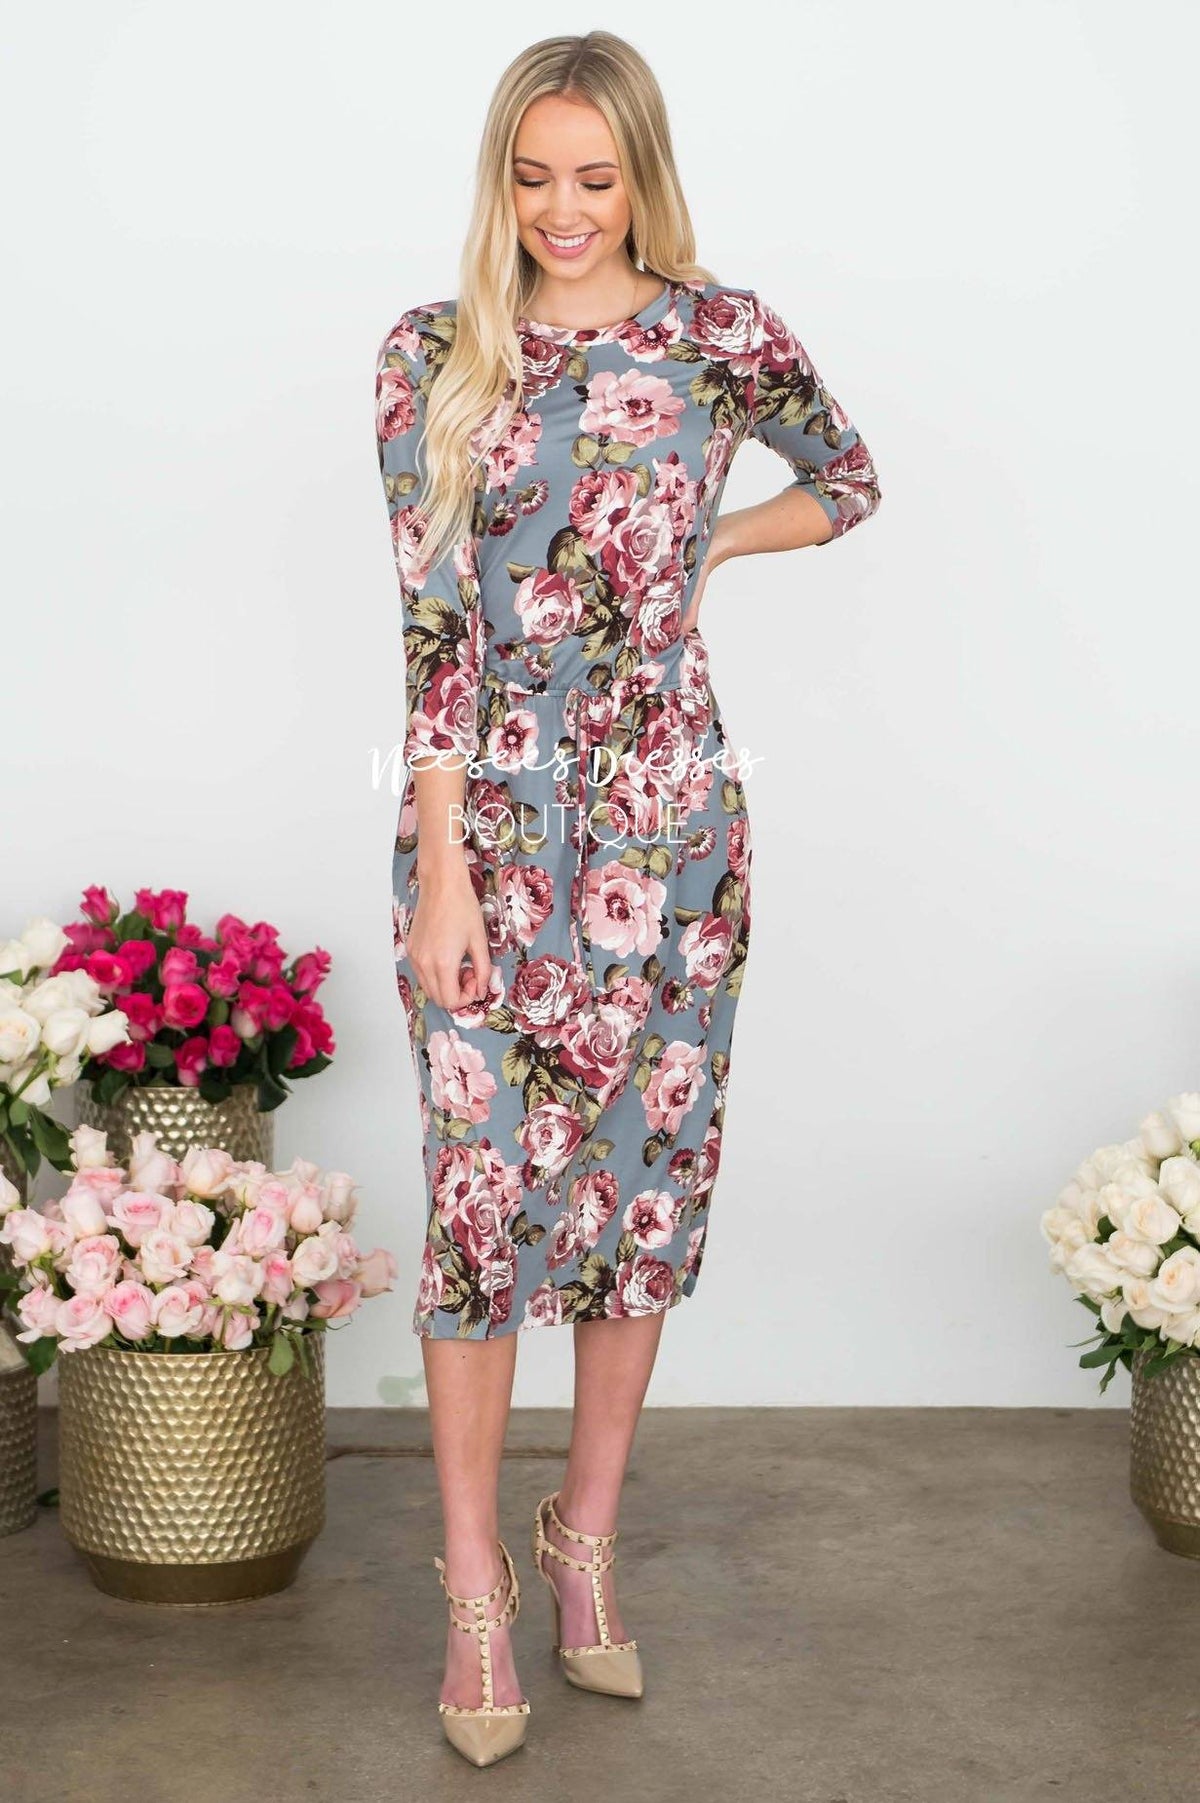 Gray and Mauve Floral Modest Dress | Best Place To Buy Modest Dress ...